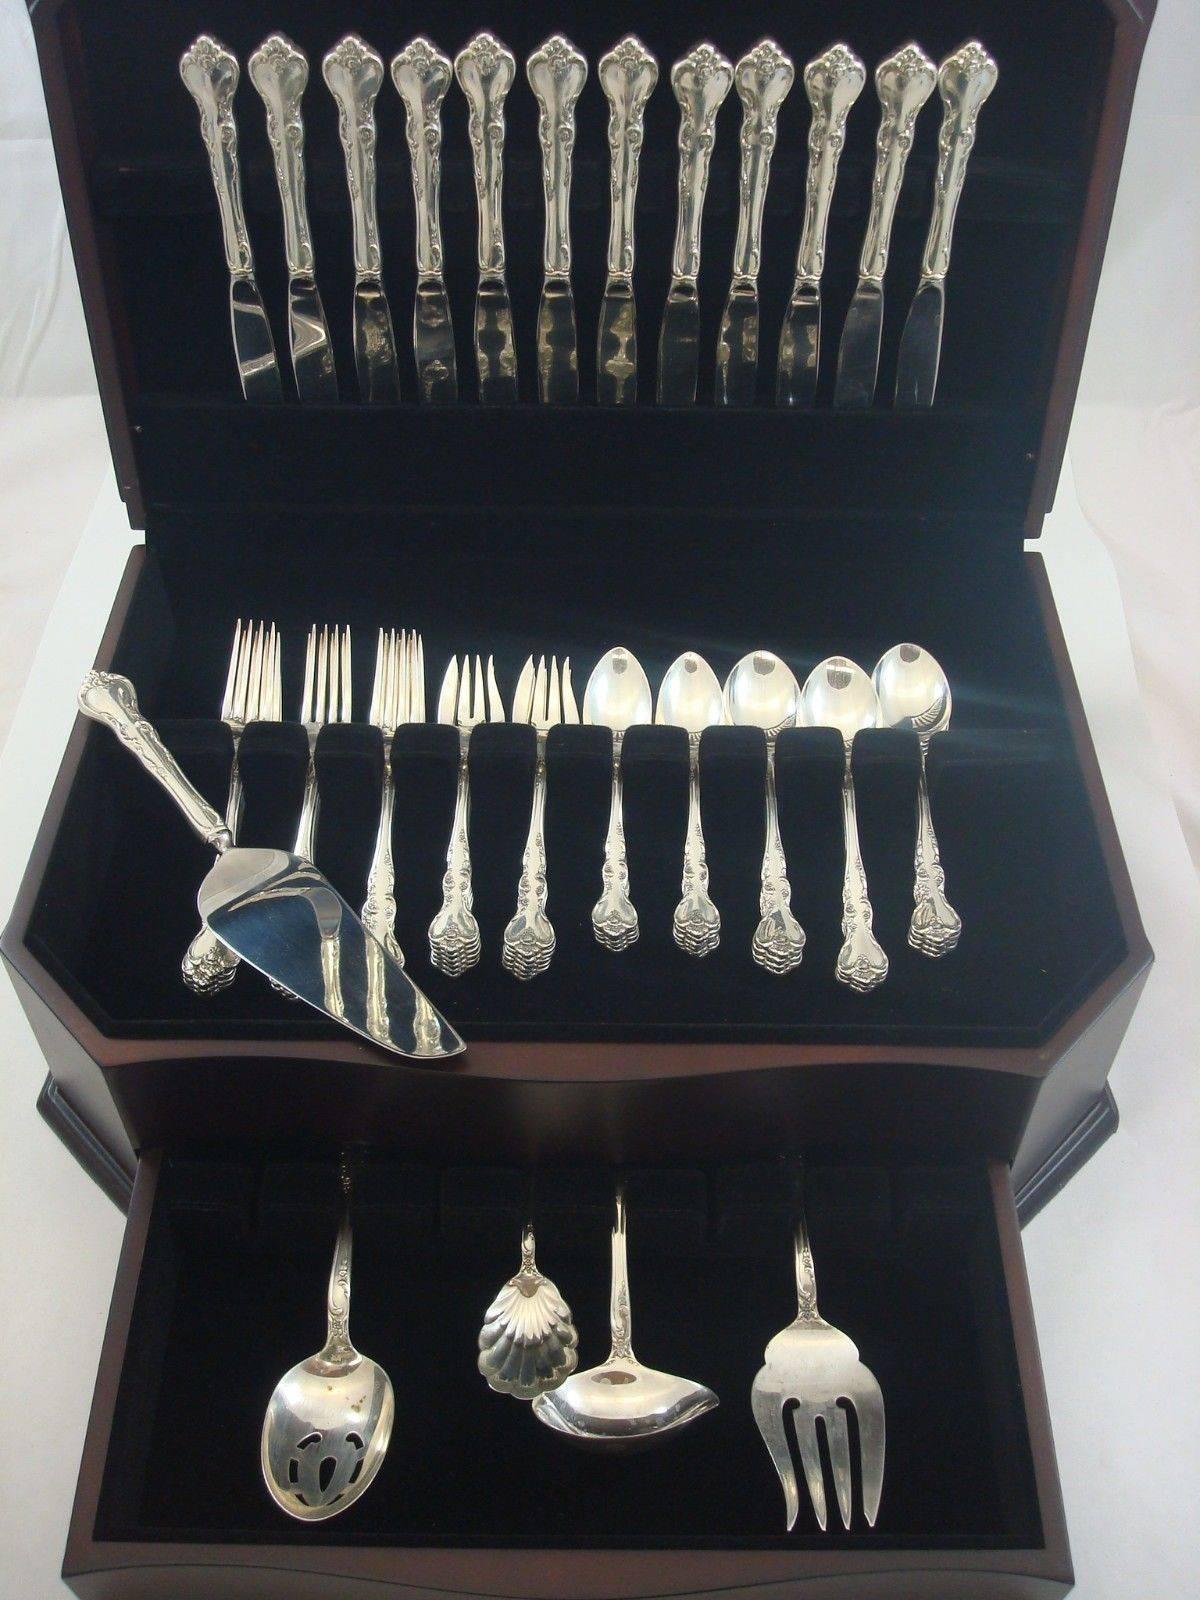 Savannah by Reed & Barton sterling silver flatware set of 65 pieces. This set includes:

12 knives, 9 1/8